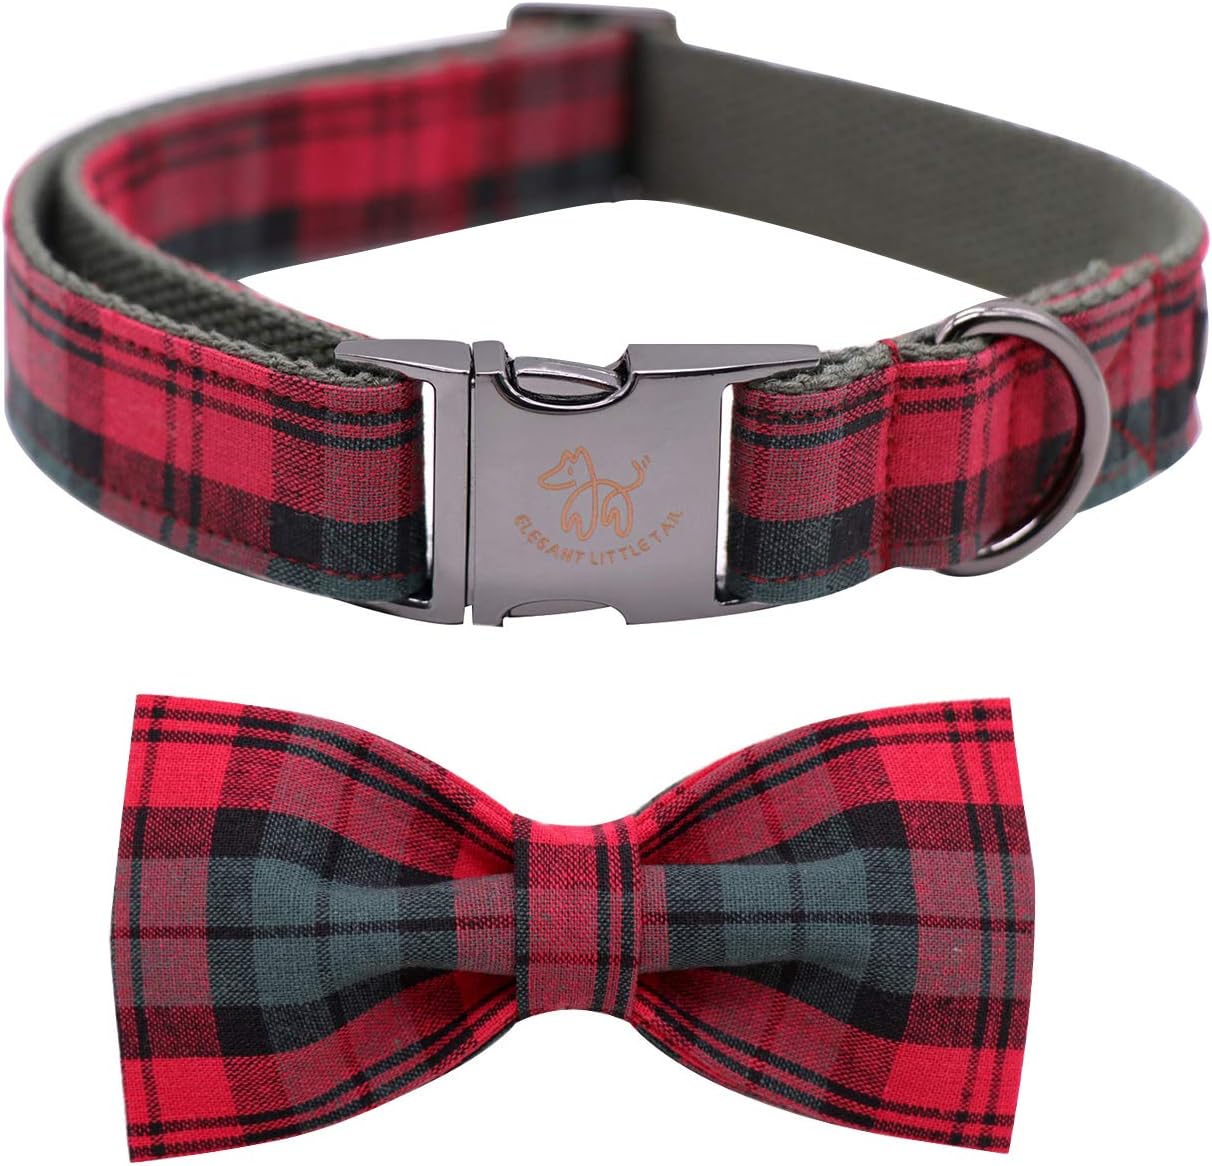 Dog Collar with Bow, Cotton & Webbing, Bowtie Dog Collar, Adjustable Dog Collars for Small Medium Large Dogs and Cats